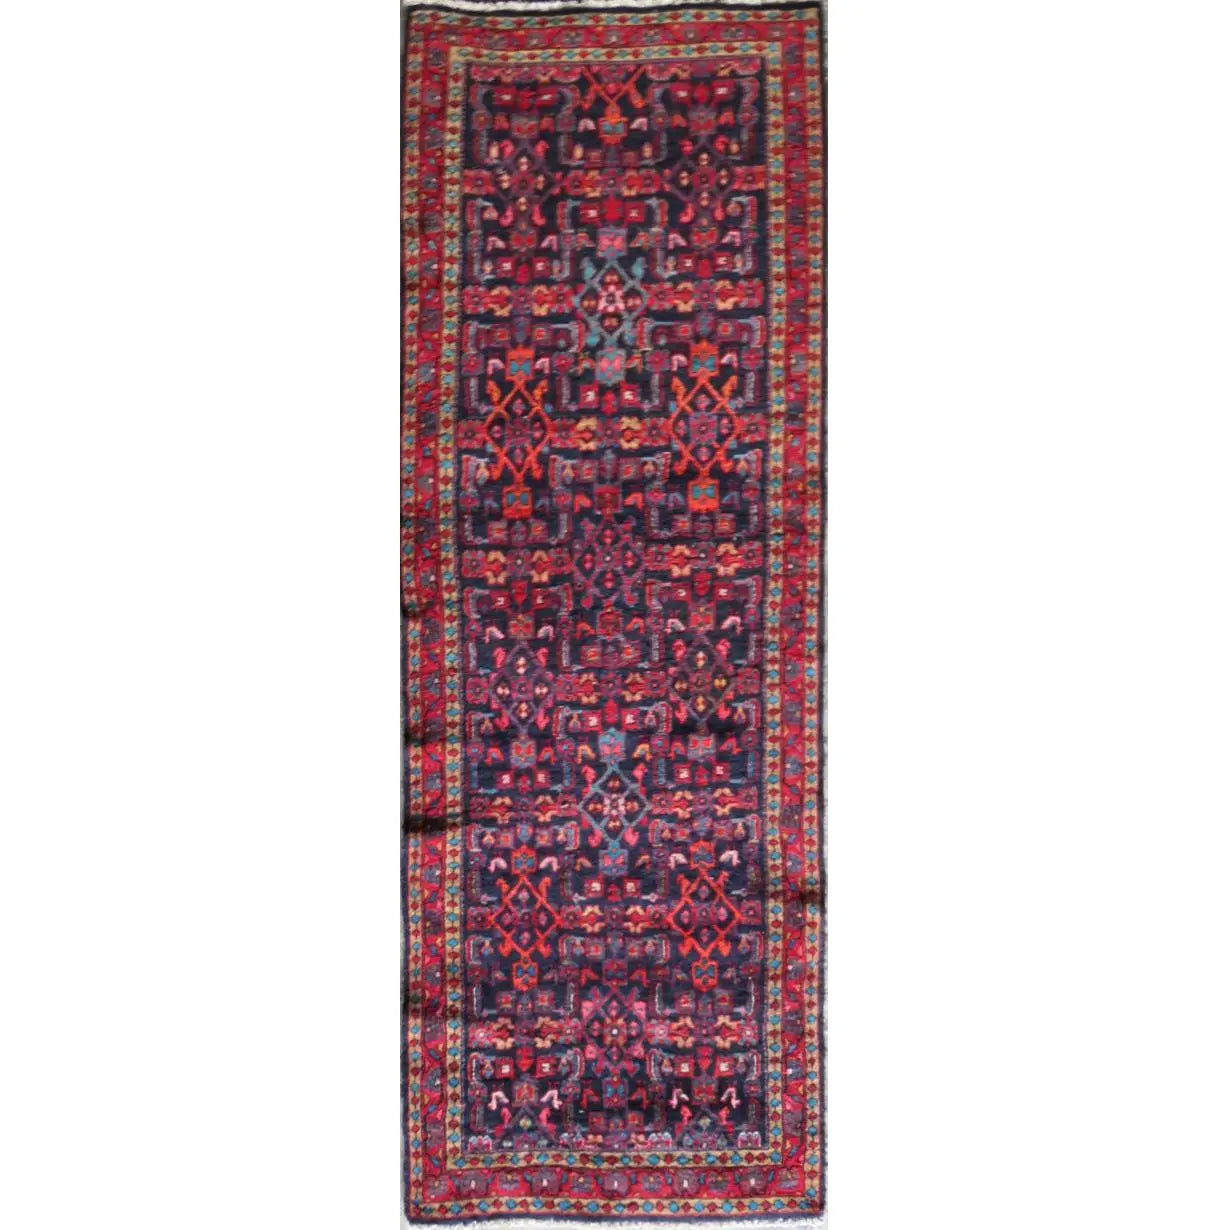 Hand-Knotted Persian Wool Rug _ Luxurious Vintage Design, 10'10" x 3'3", Artisan Crafted